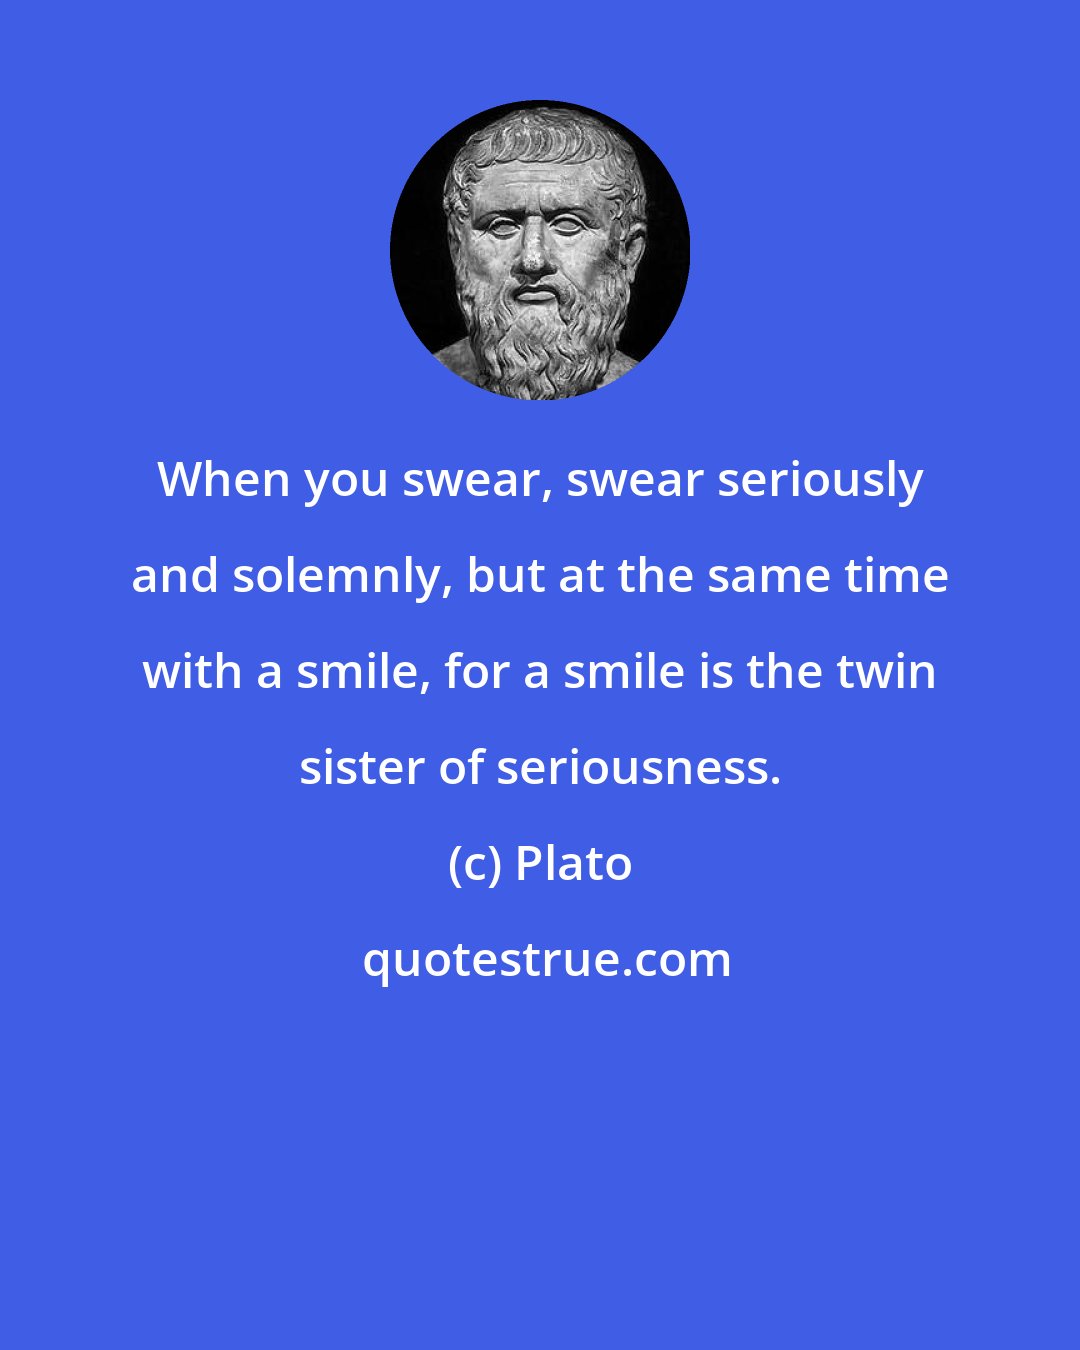 Plato: When you swear, swear seriously and solemnly, but at the same time with a smile, for a smile is the twin sister of seriousness.